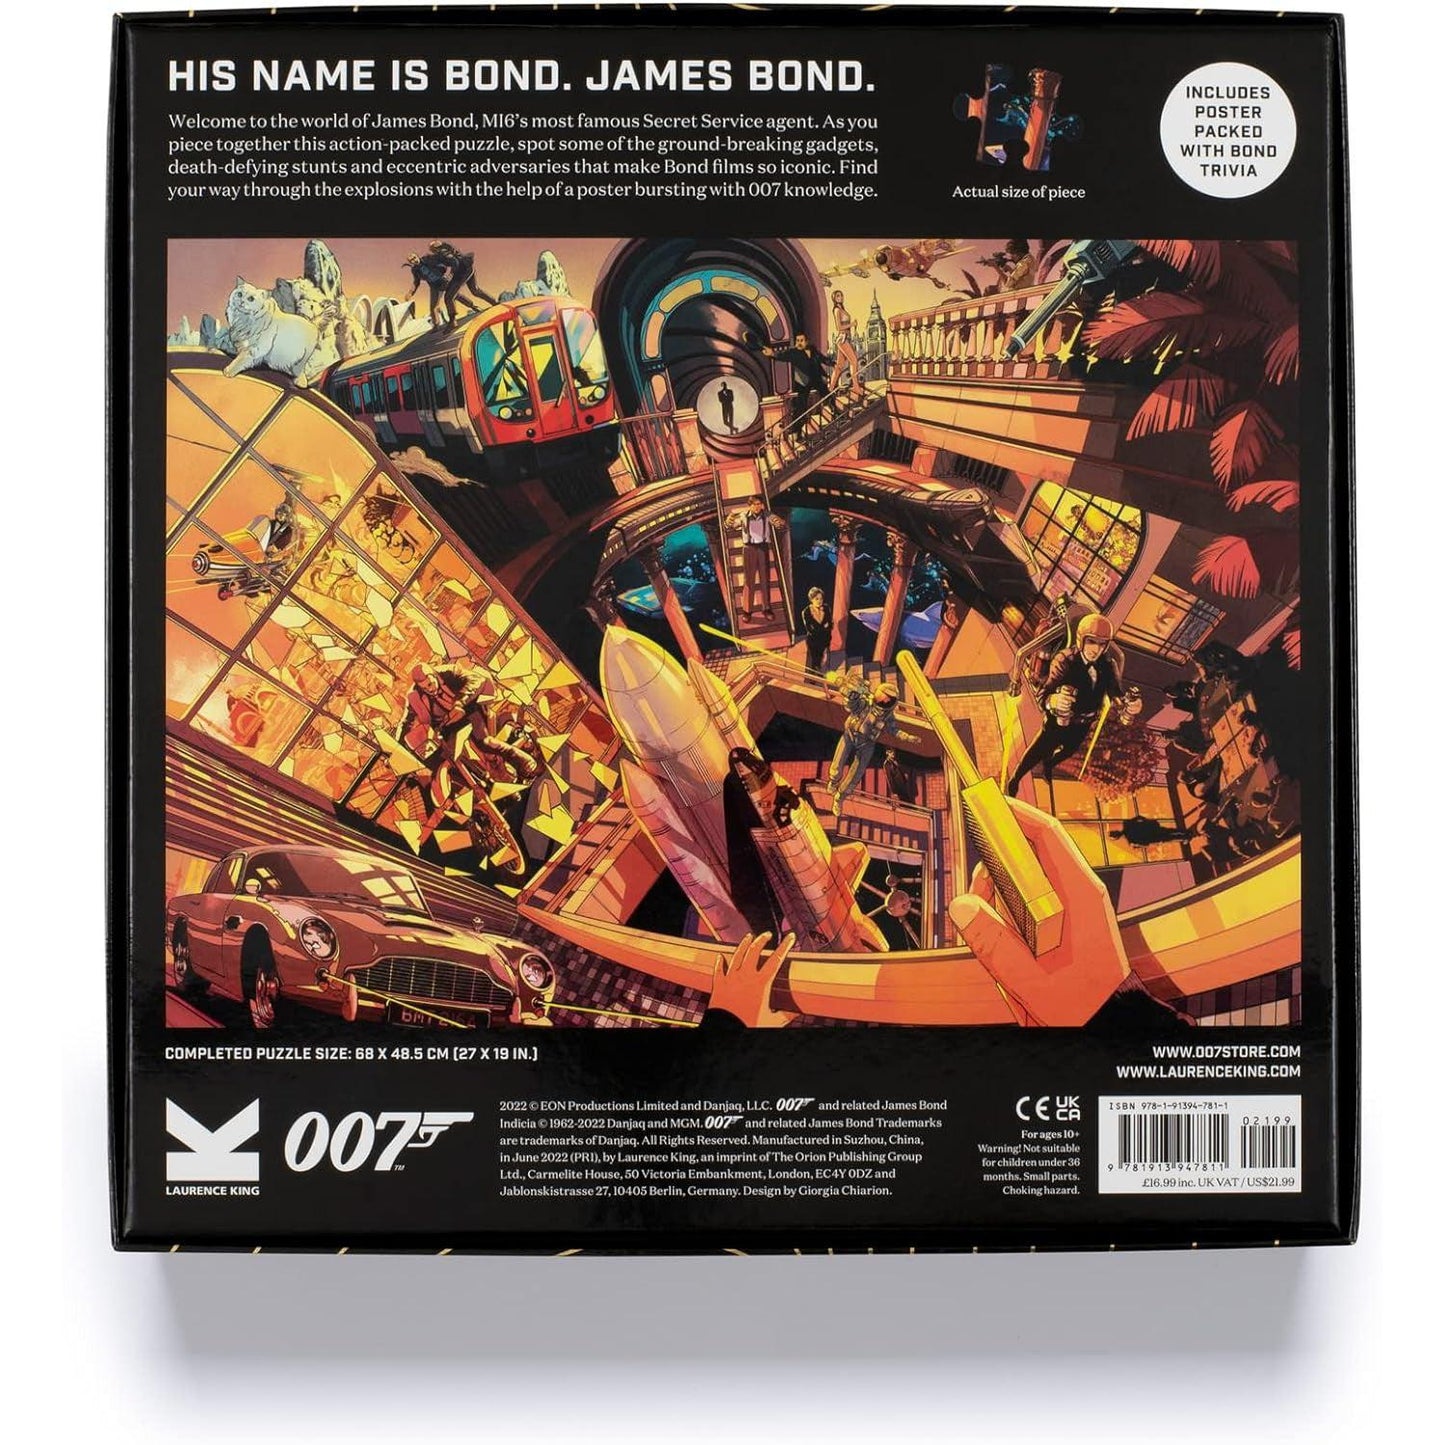 The World of James Bond 1000 Piece Jigsaw Puzzle Laurence King